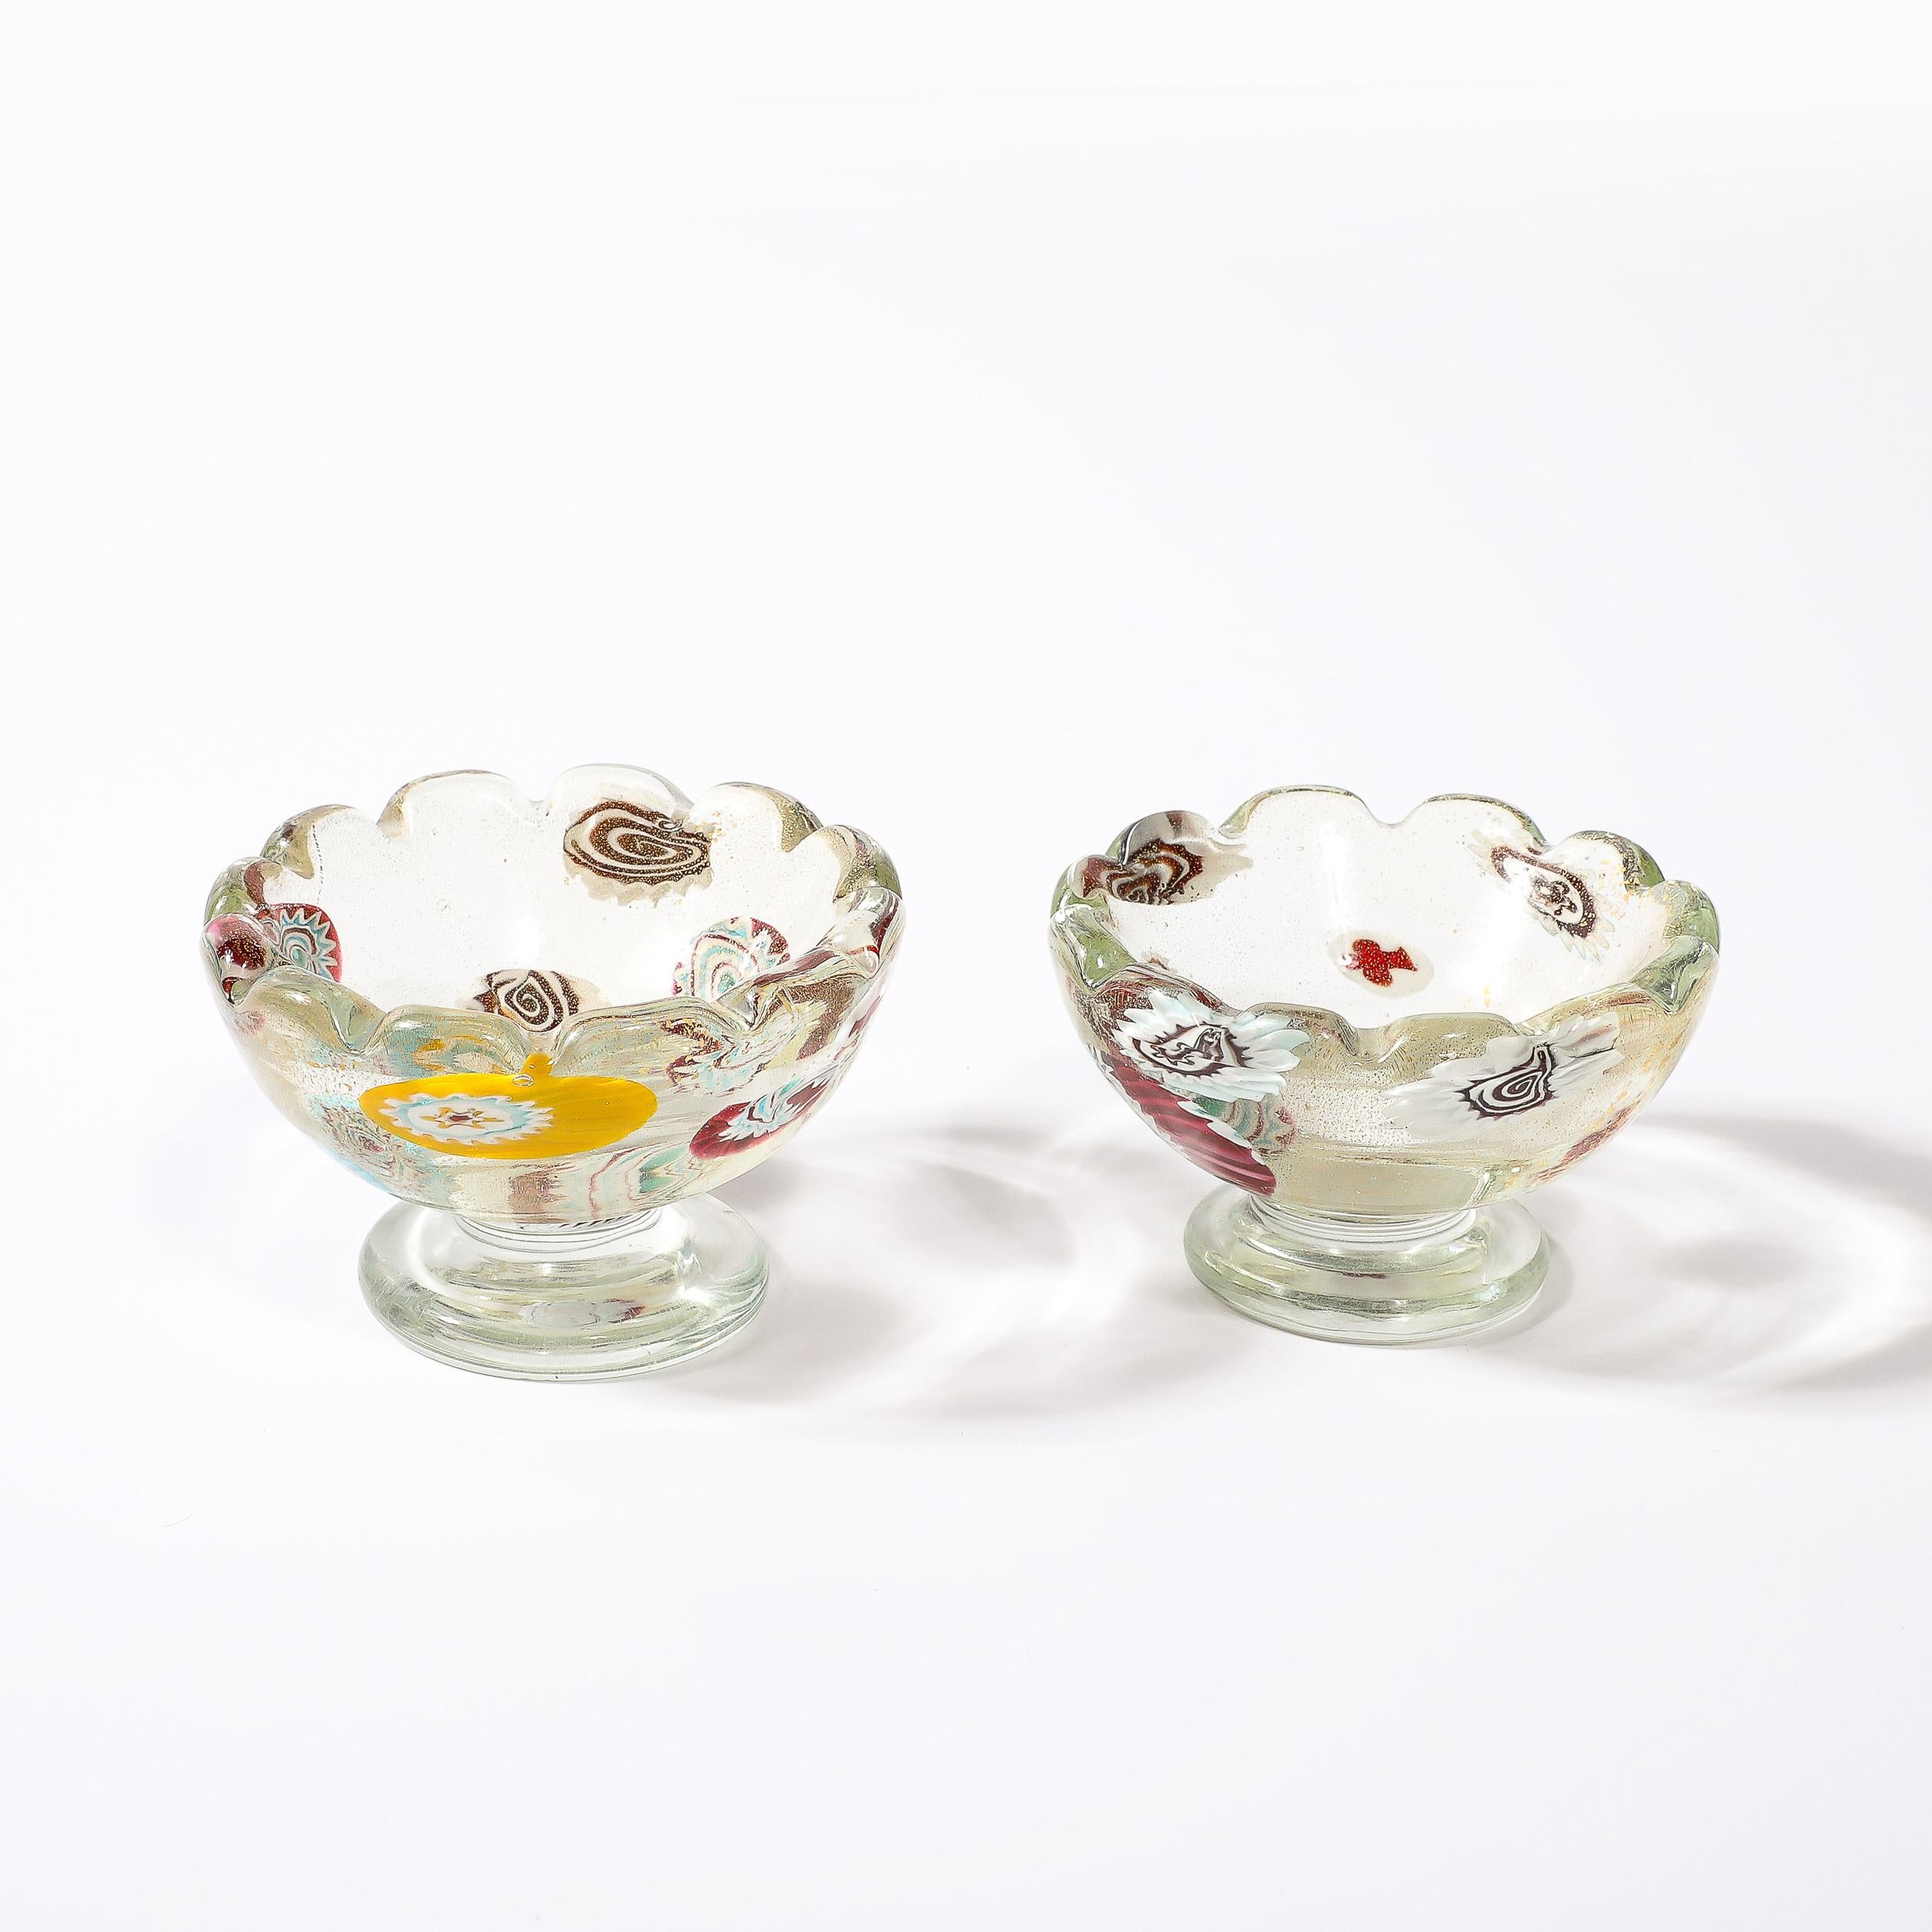 This charming Pair of Mid-Century Modernist Hand-Blown Murano Glass Bowls W/ Scalloped Edges & Millefiori Detailing W/24 Karat Gold Flecks originate from Italy, Circa 1950. Featuring a lovely rhythm and visual presence with the scalloped edge